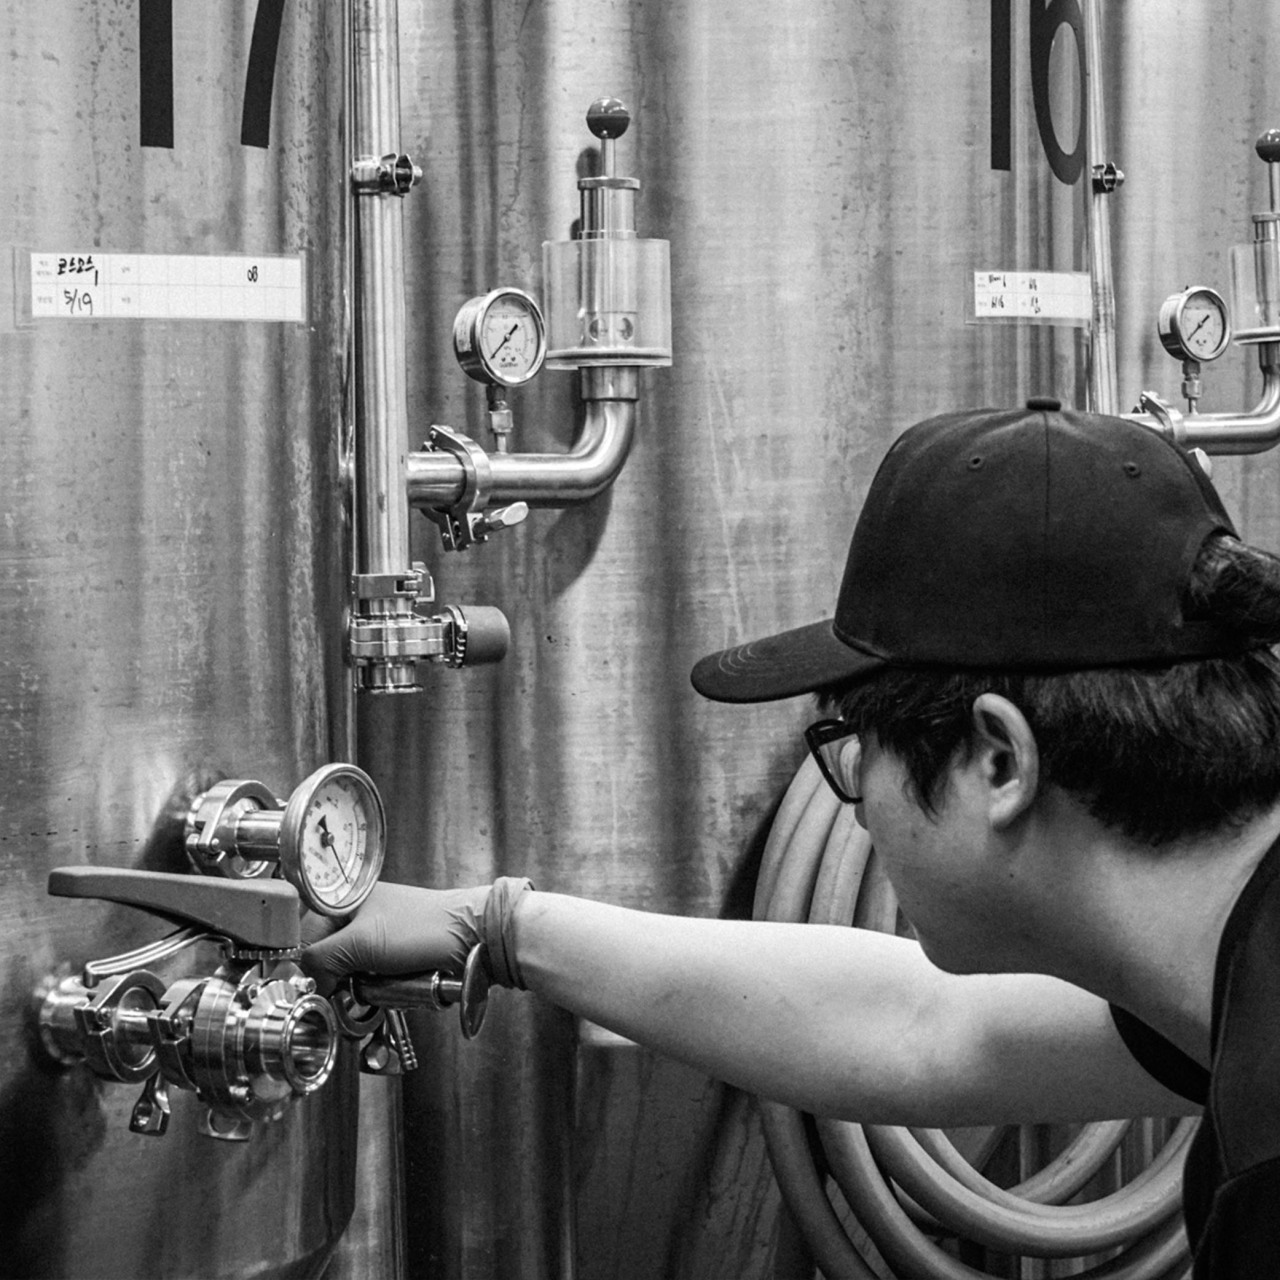 All brews from Original Beer Company are handcrafted, according to CEO Steven Park. (OBC)